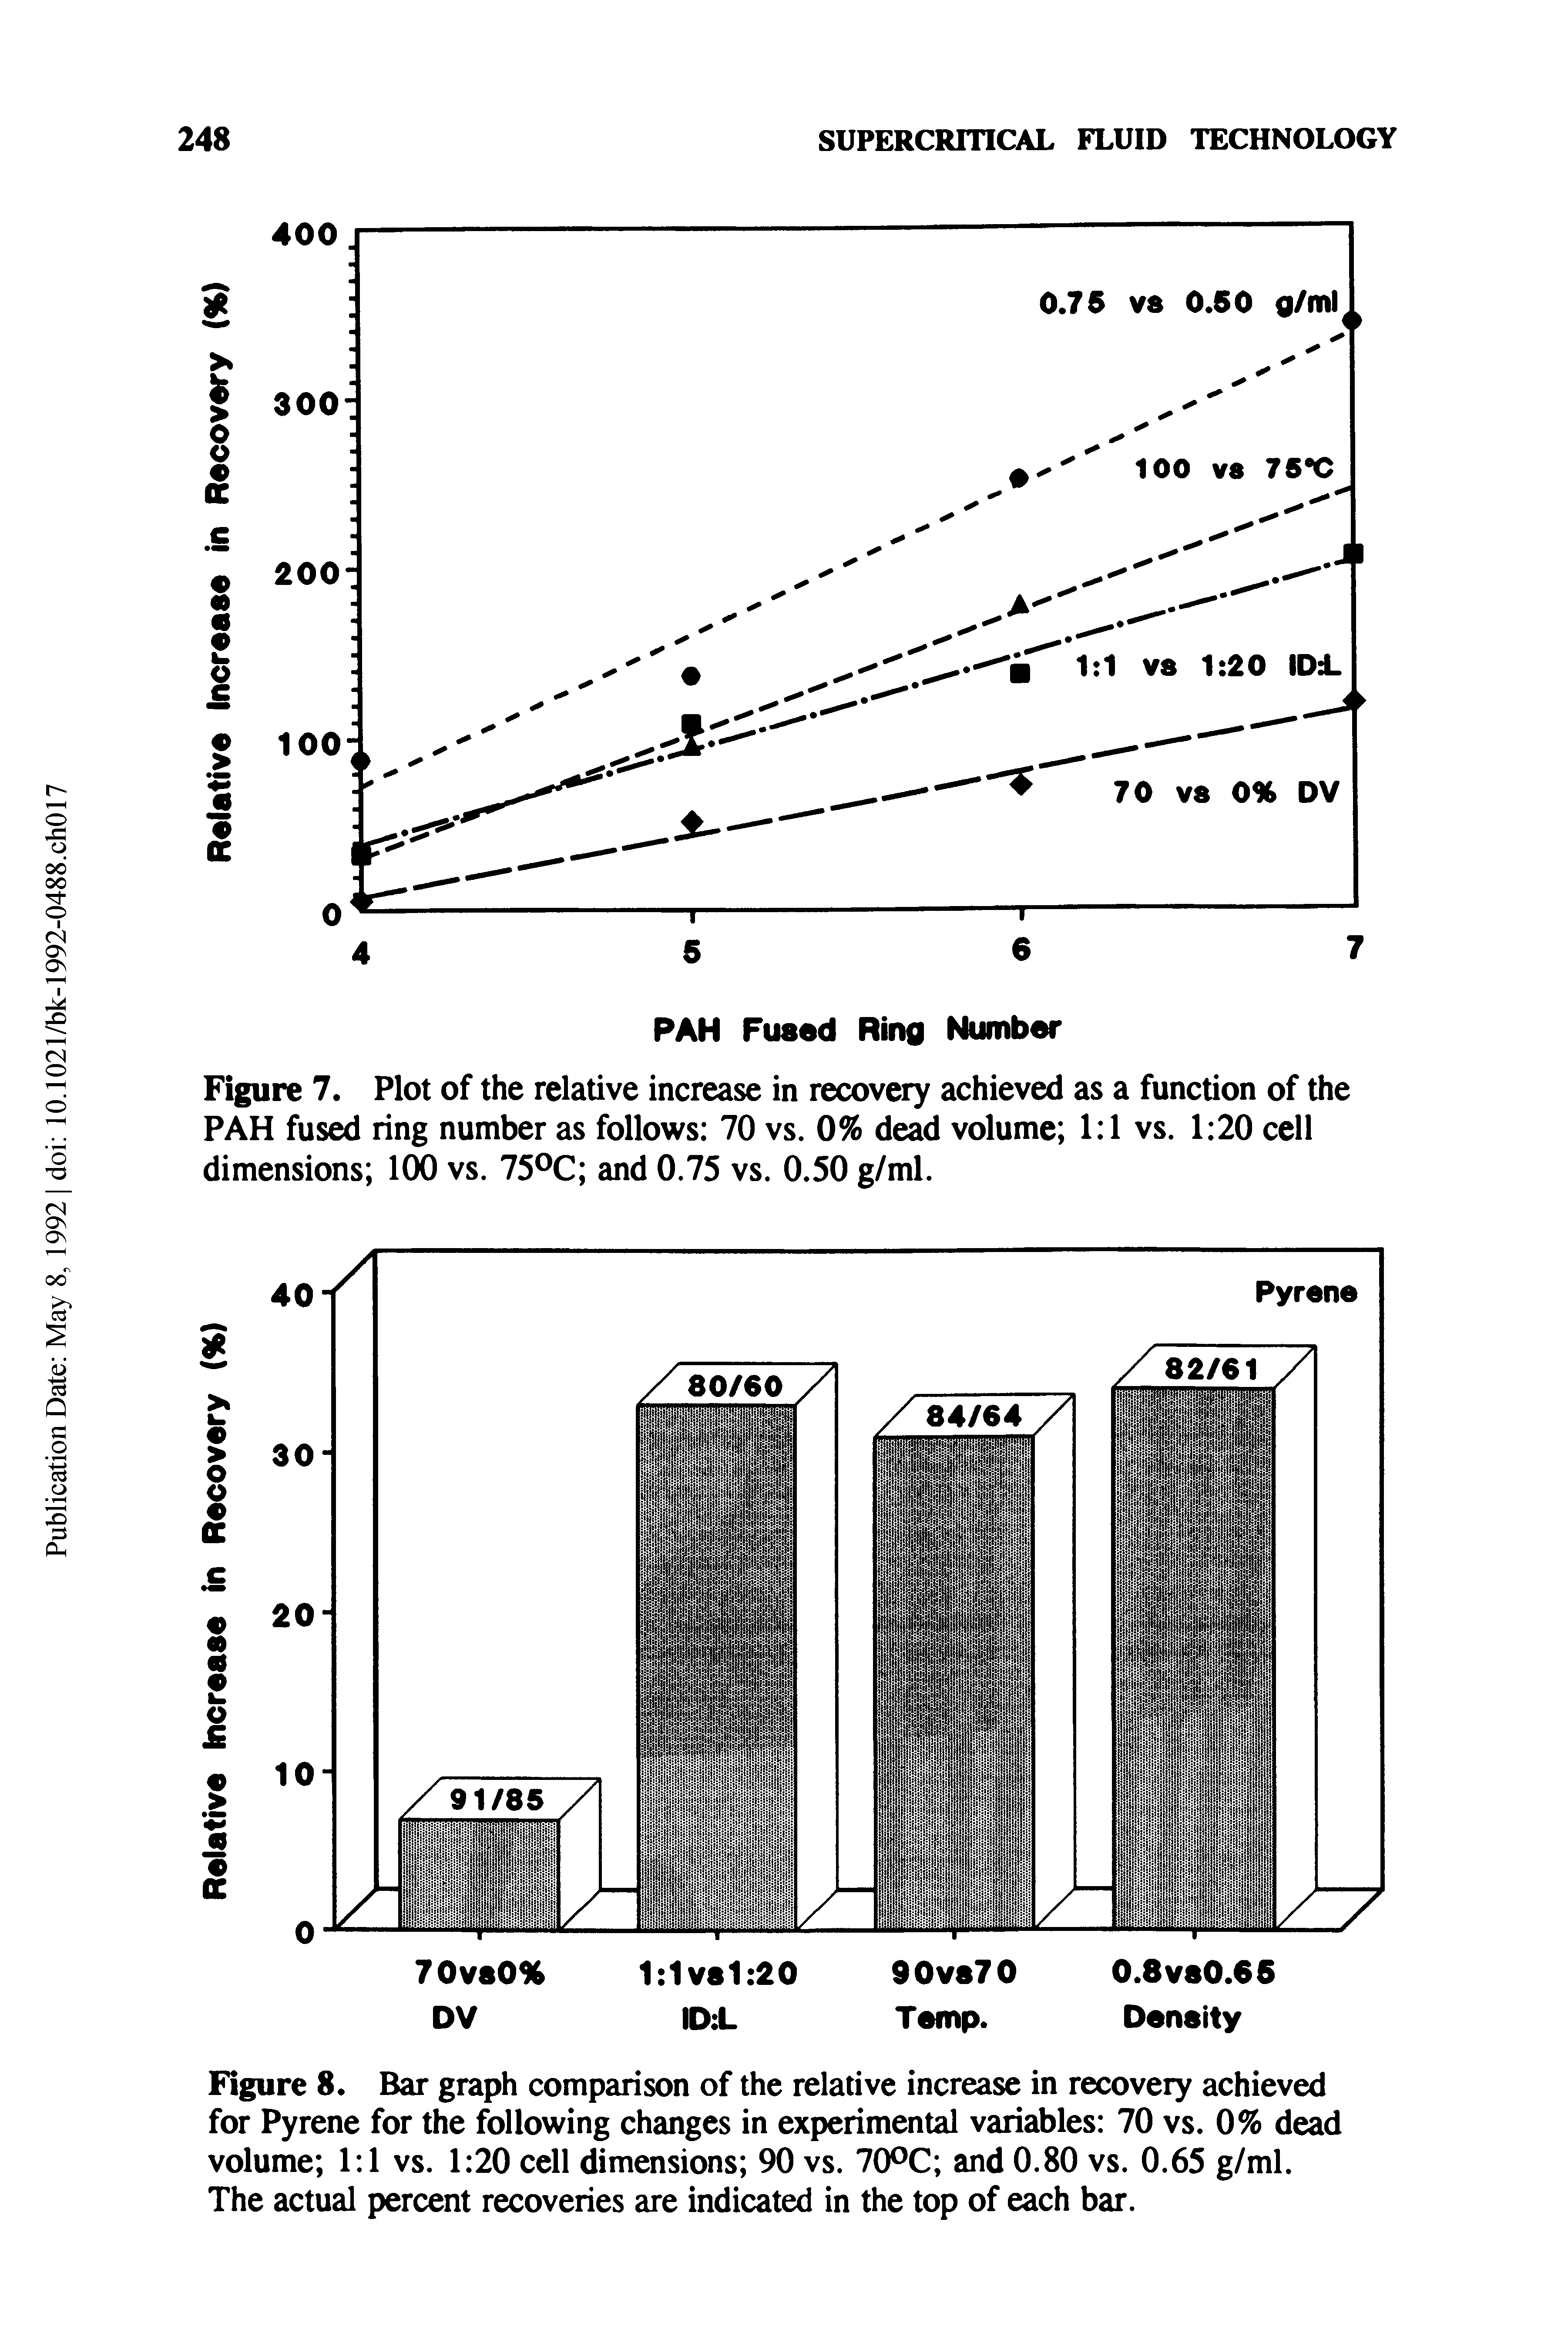 Figure 7. Plot of the relative increase in recovery achieved as a function of the PAH fused ring number as follows 70 vs. 0% dead volume 1 1 vs. 1 20 cell dimensions 100 vs. 75°C and 0.75 vs. 0.50 g/ml.